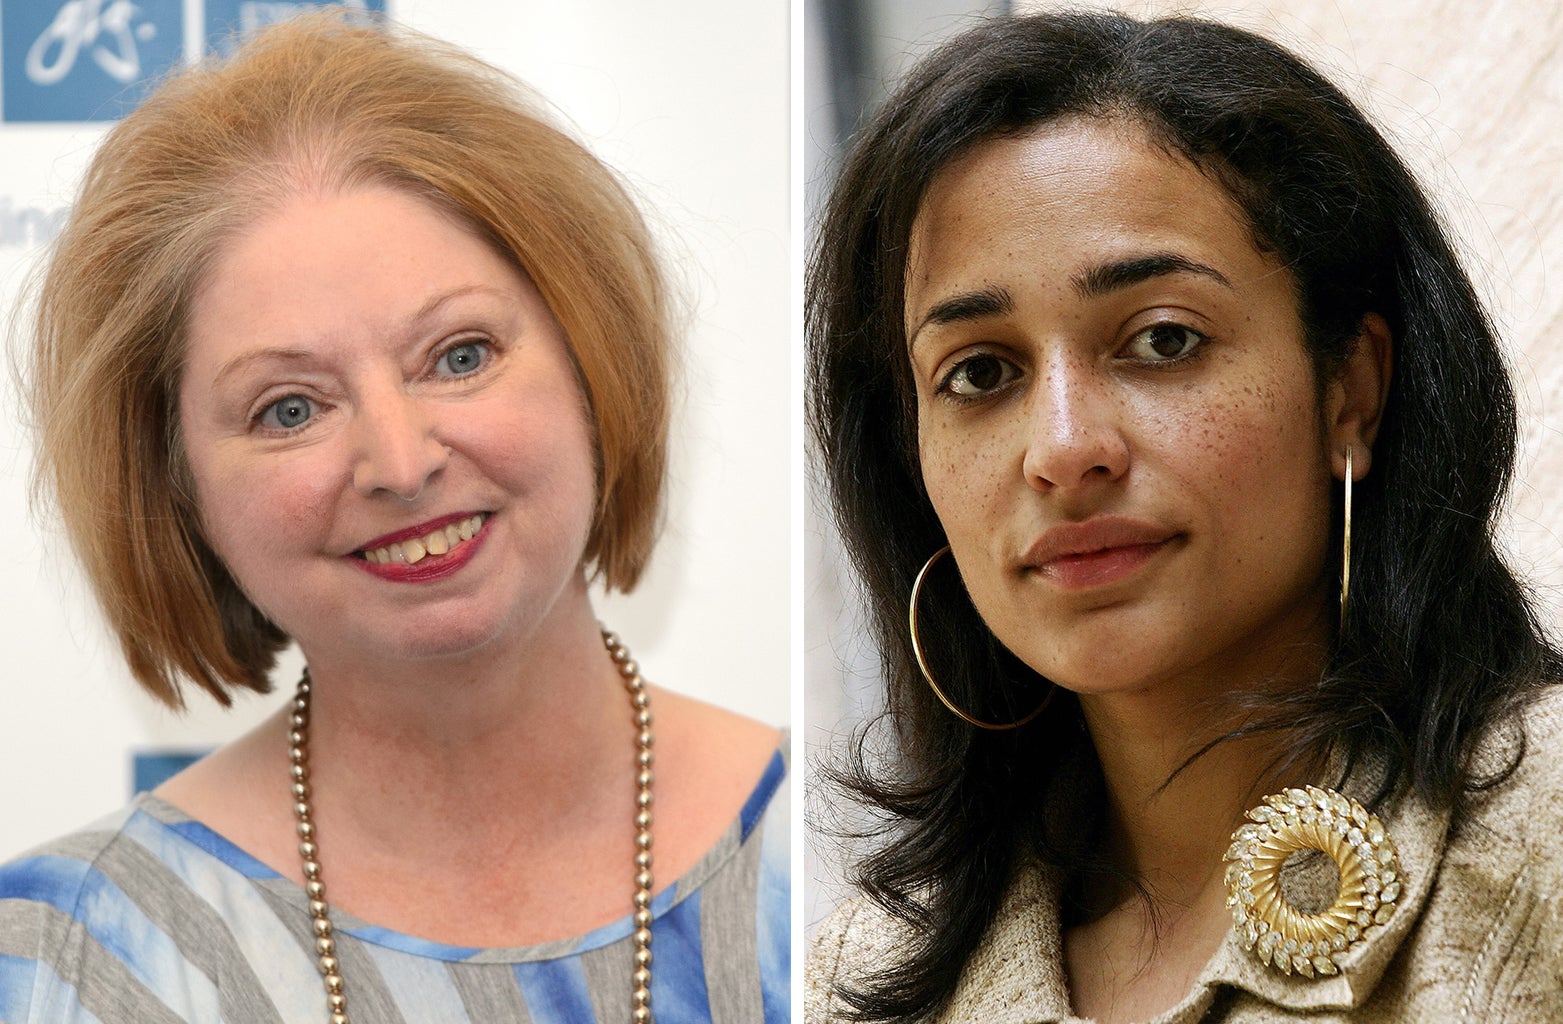 Hilary Mantel and Zadie Smith are among the six shortlisted for the Women's Prize for Fiction